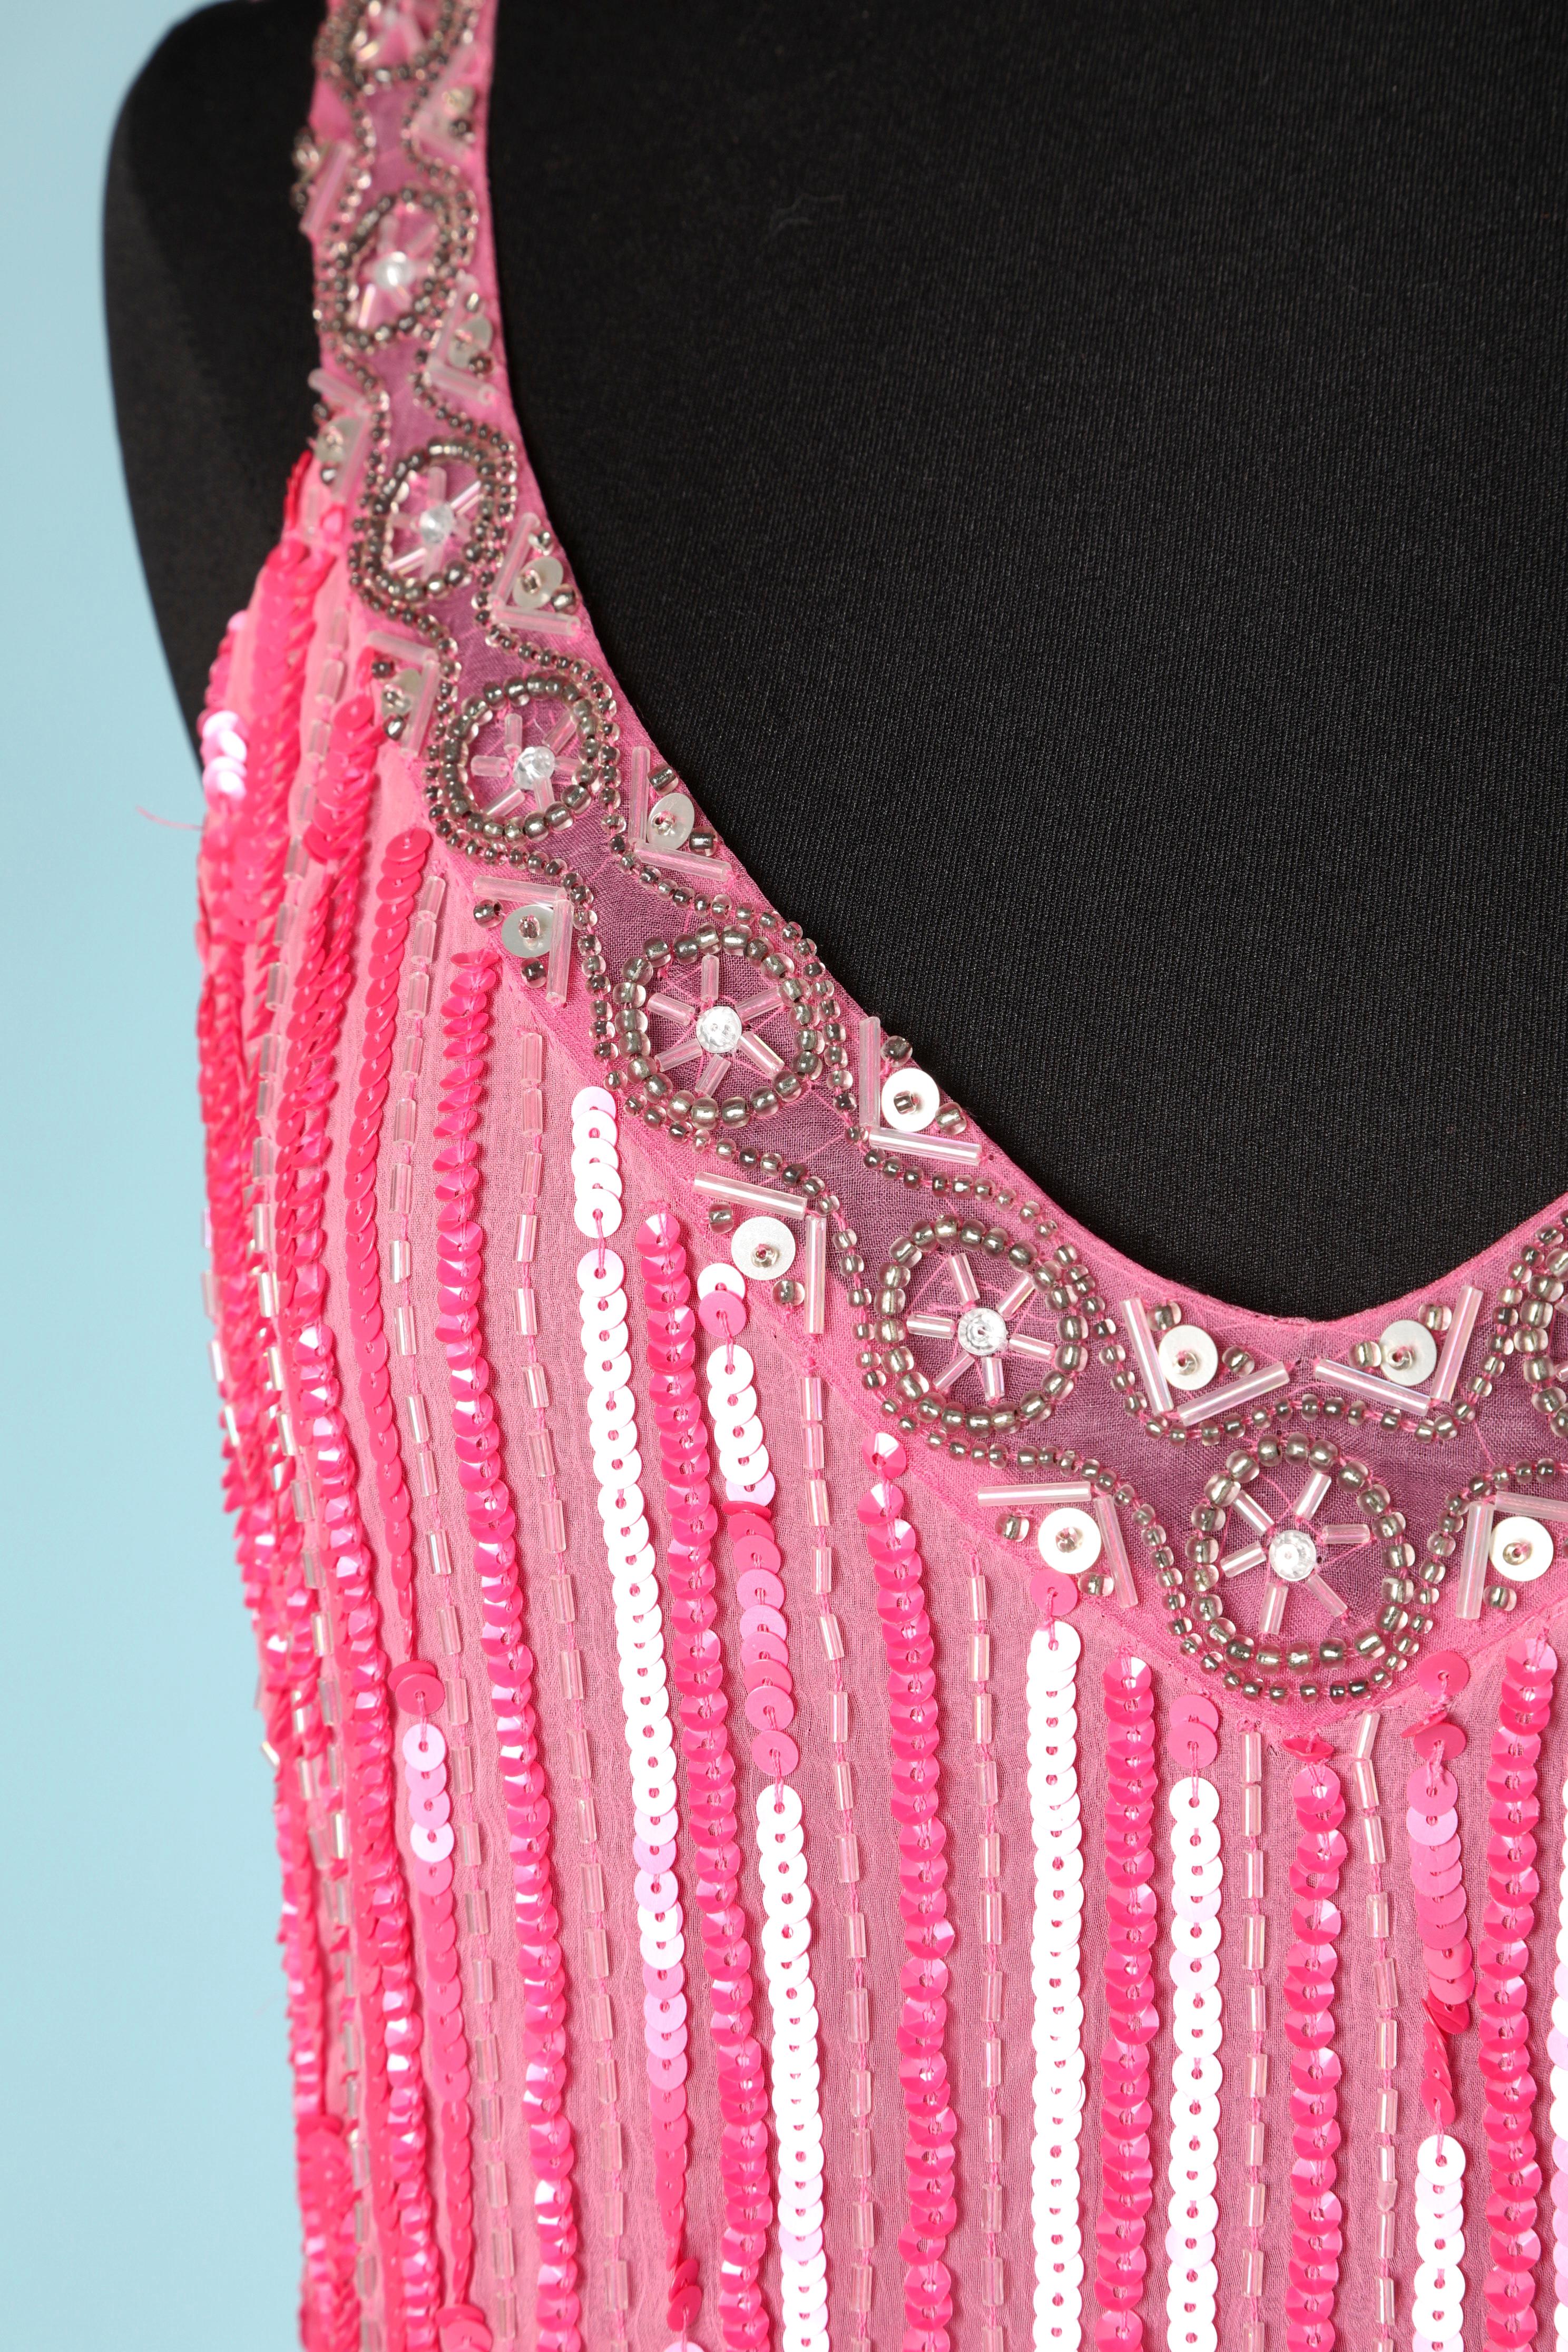 Pink chiffon dress fully embroidered with feathers and chiffon fringes